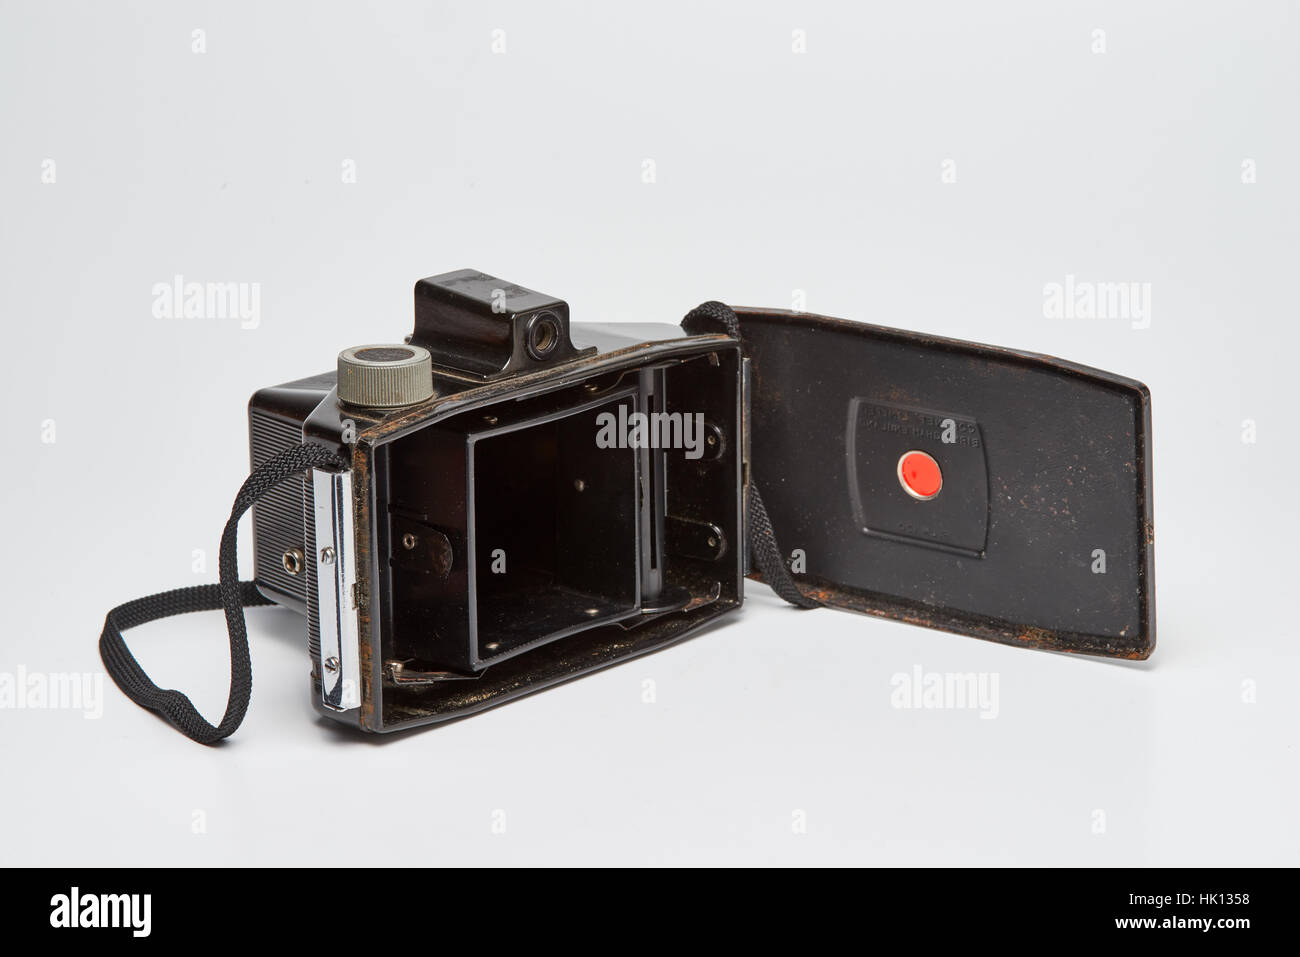 The Coronet Flashmaster was manufactured by the Coronet Camera Company in circa 1954. Twelve 2 1/4 inch square (6 x 6 cm) exposures on number 120 roll Stock Photo